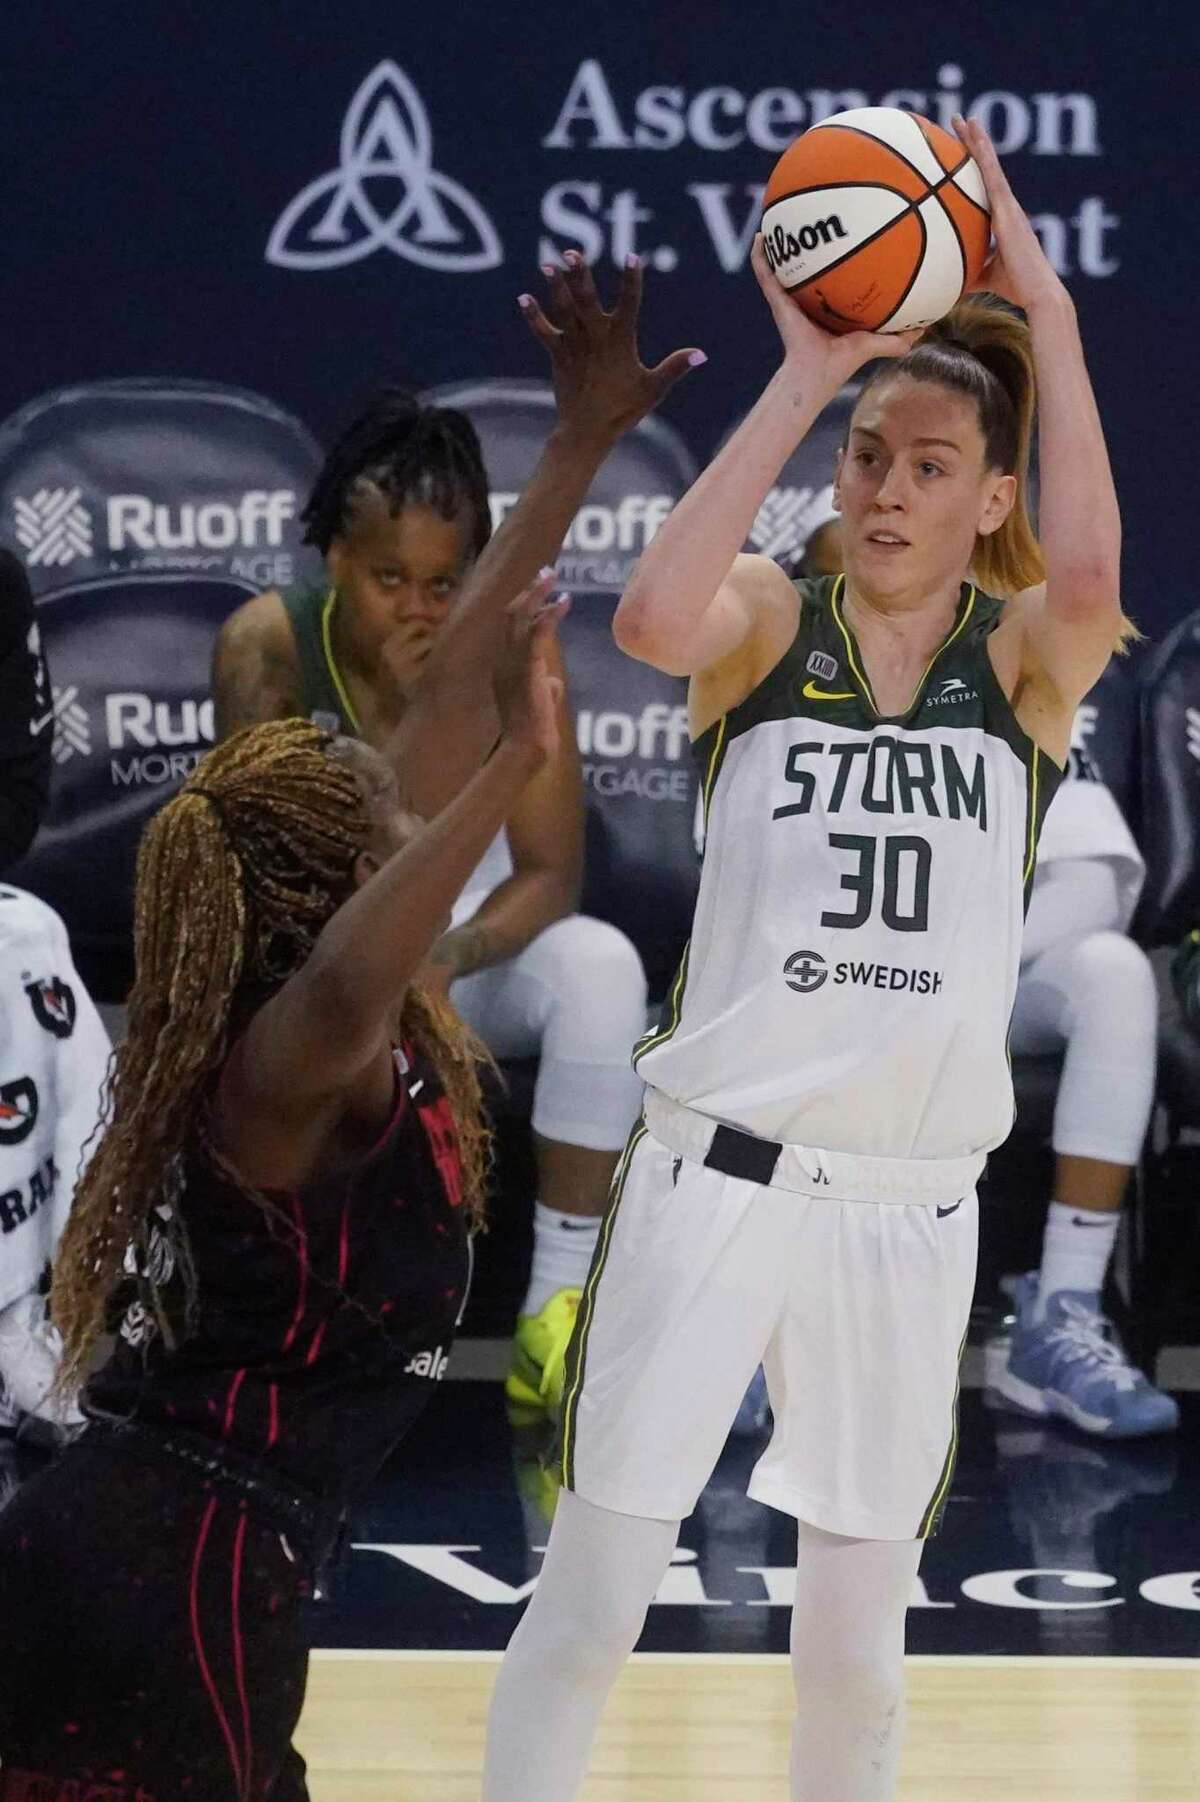 Breanna Stewart, a former UConn star, is key to Seattle’s championship hopes once again this season.